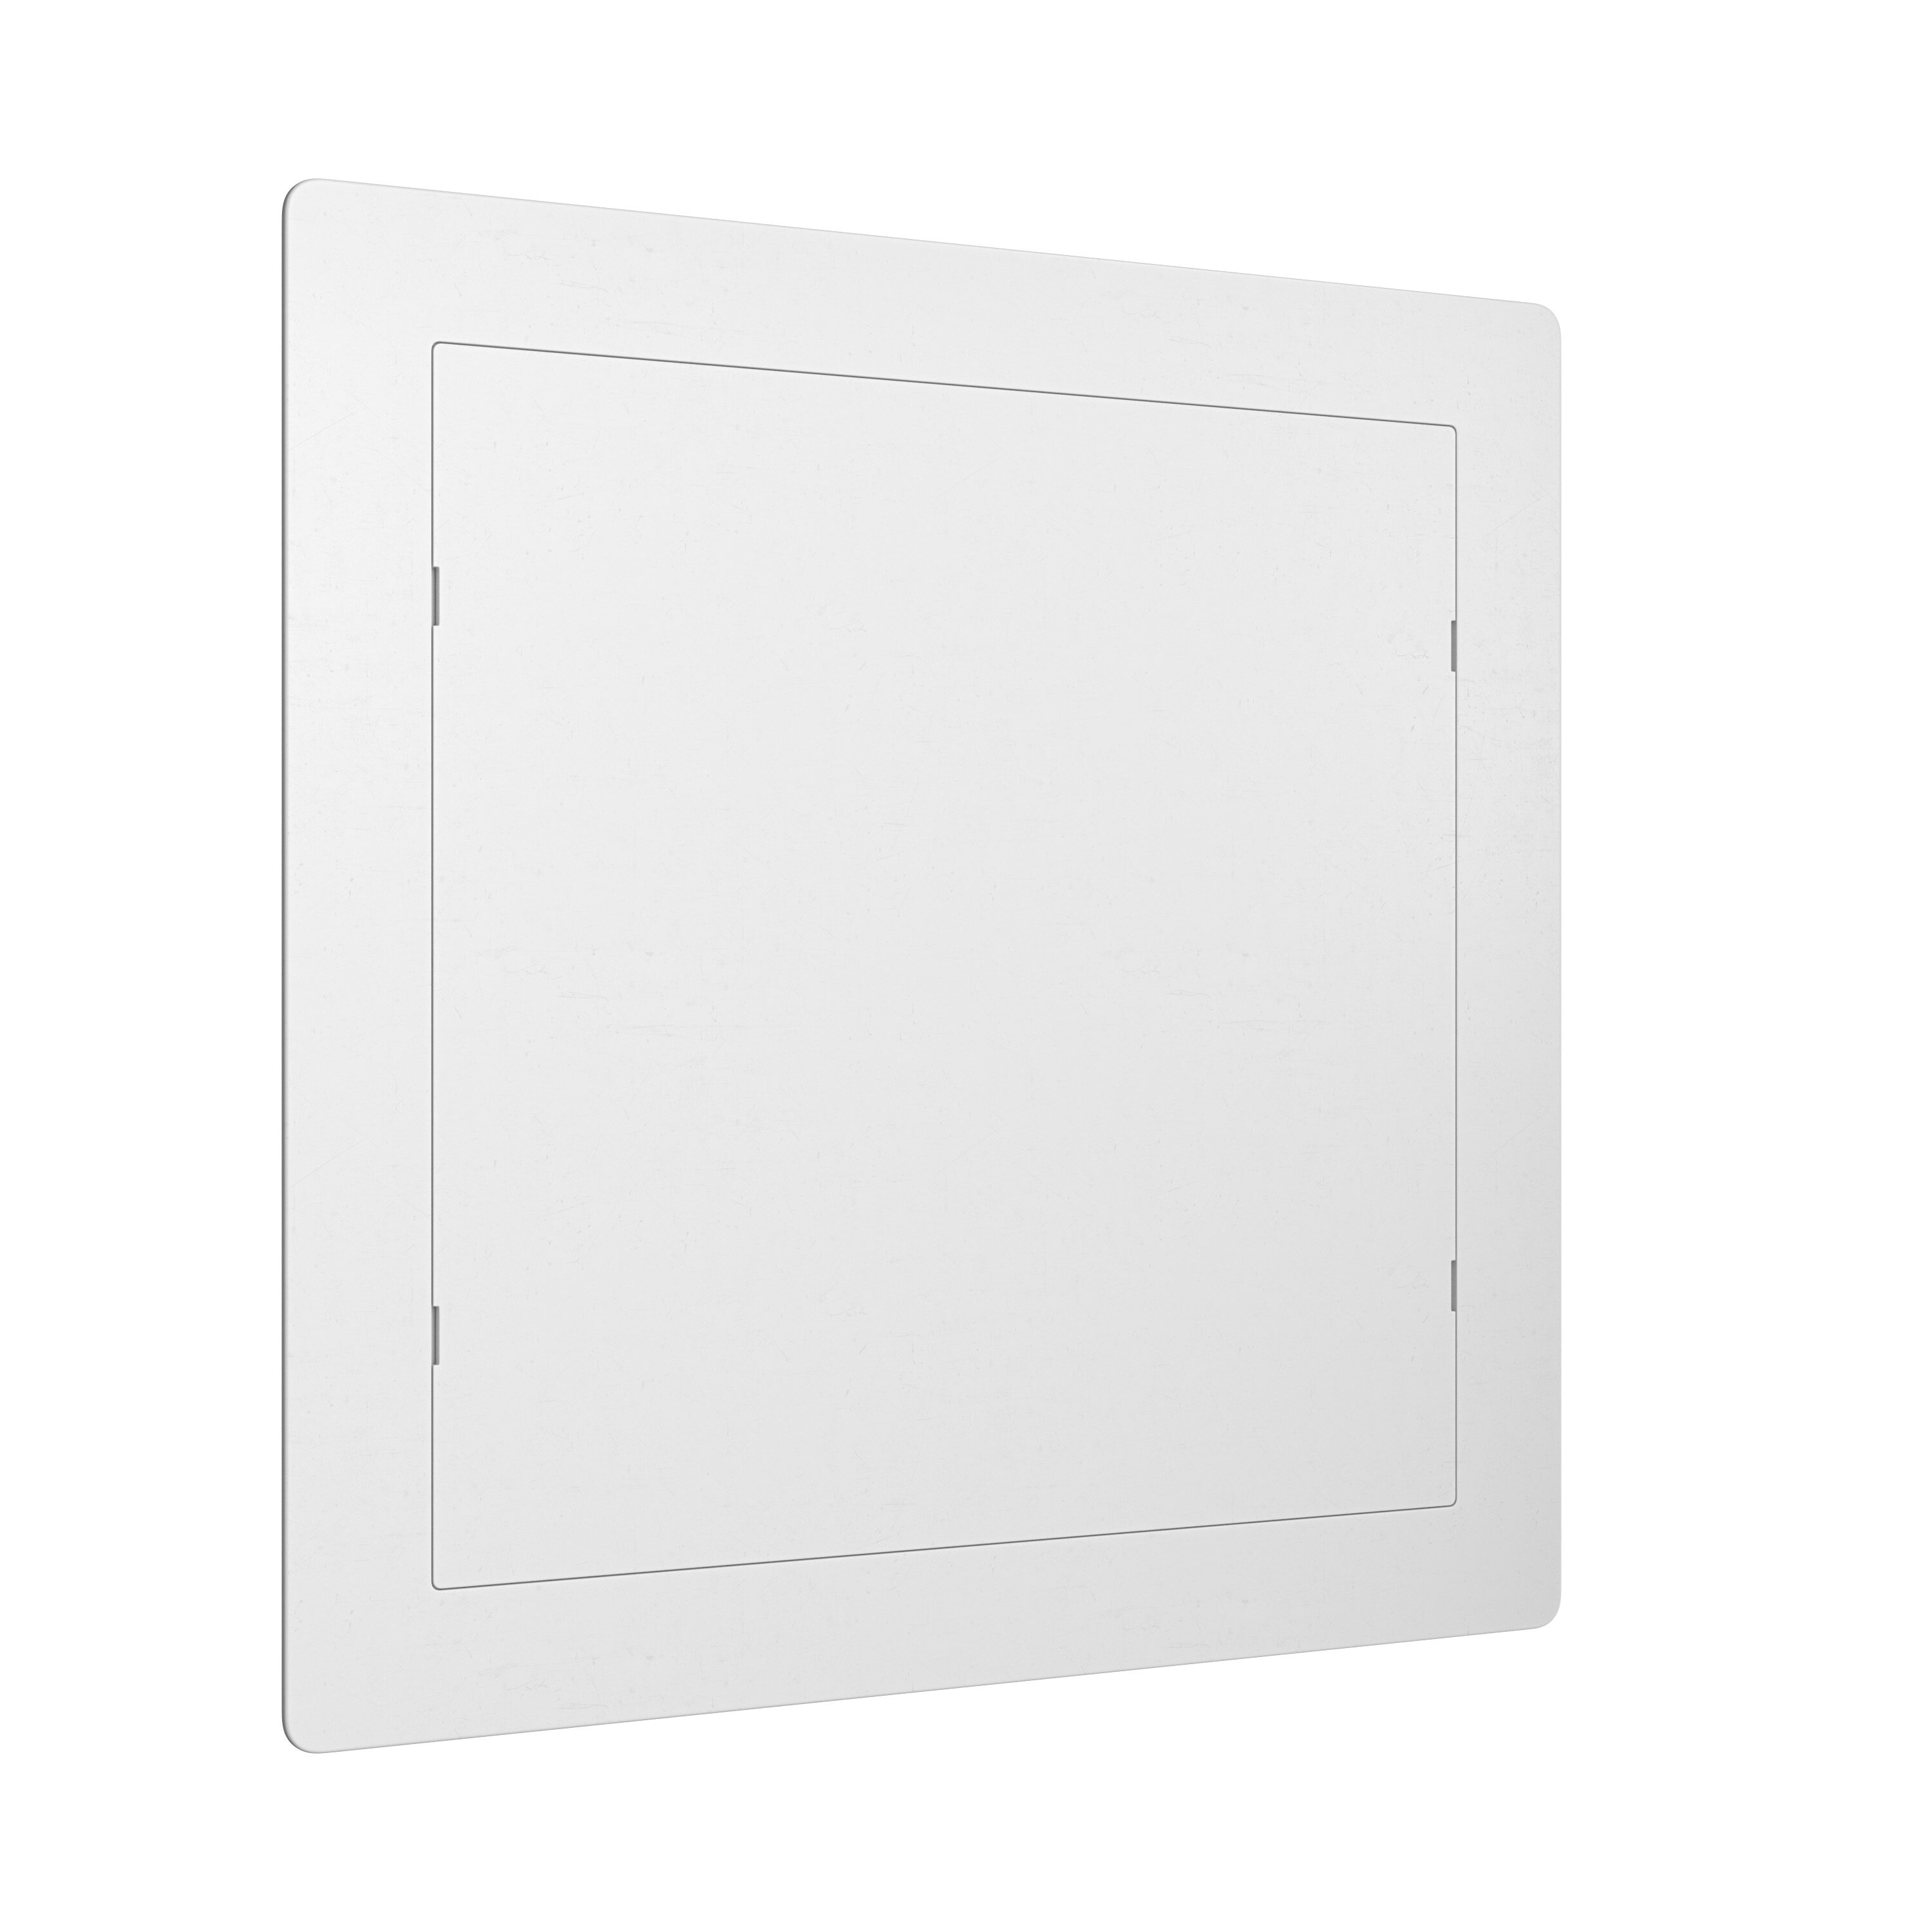 Jones Stephens Snap-Ease 17-in x 17-in Plastic Access Panel in the ...